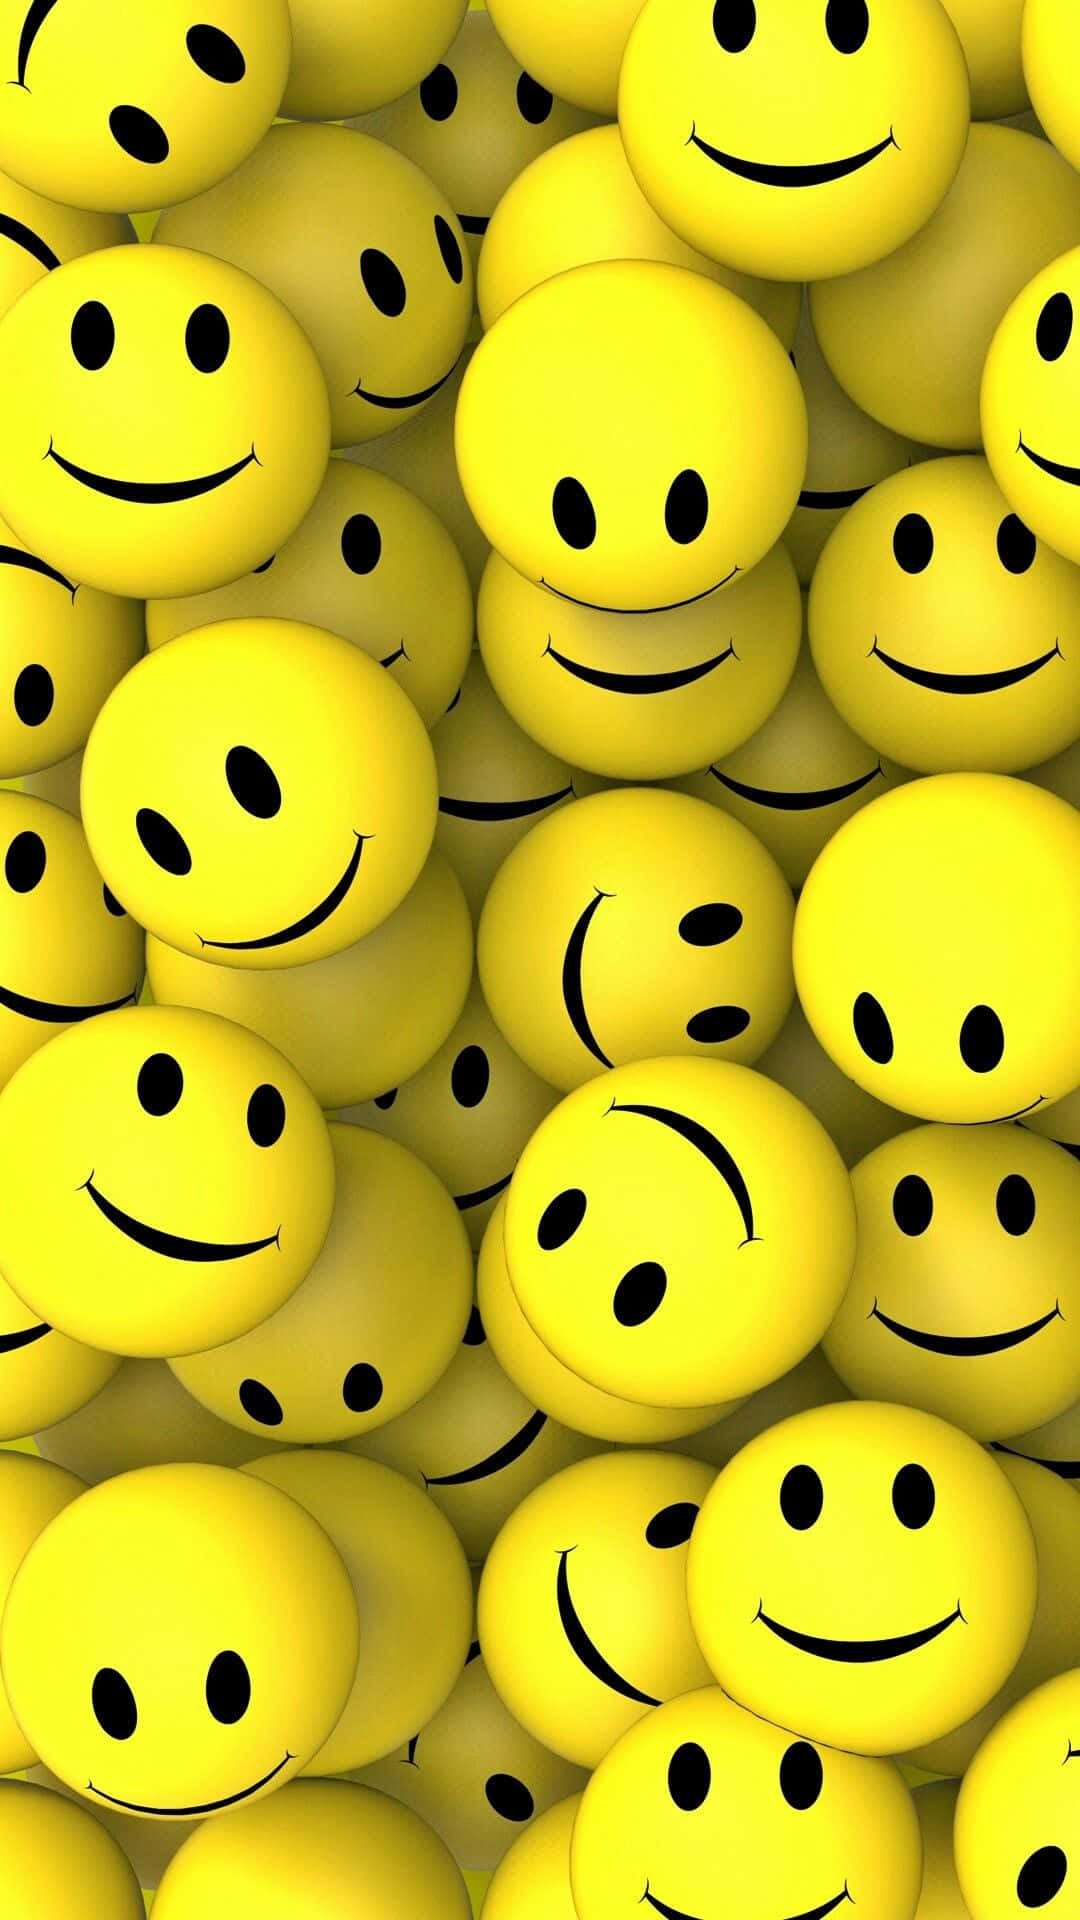 Balls With Happy Smile Face Wallpaper